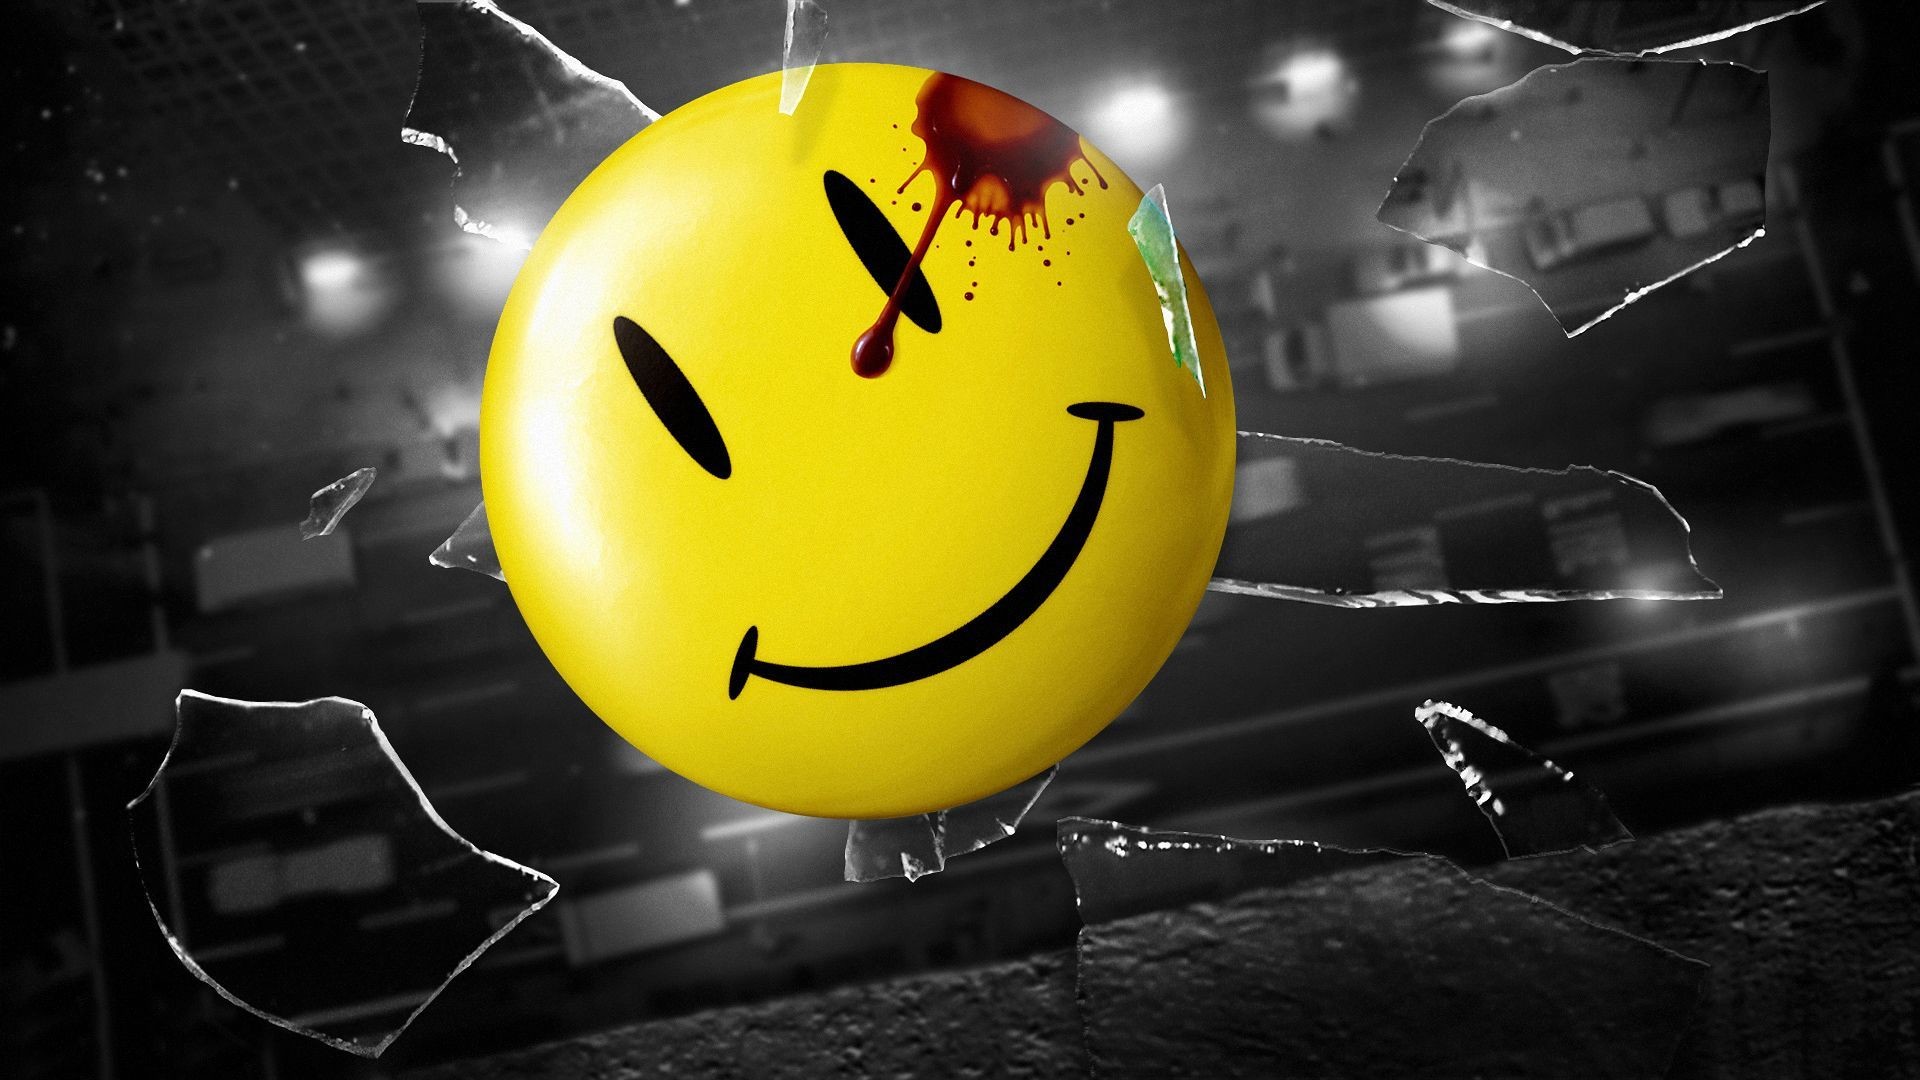 1920x1080 ... Smiley face comet attack the earth - HD wallpaper ...